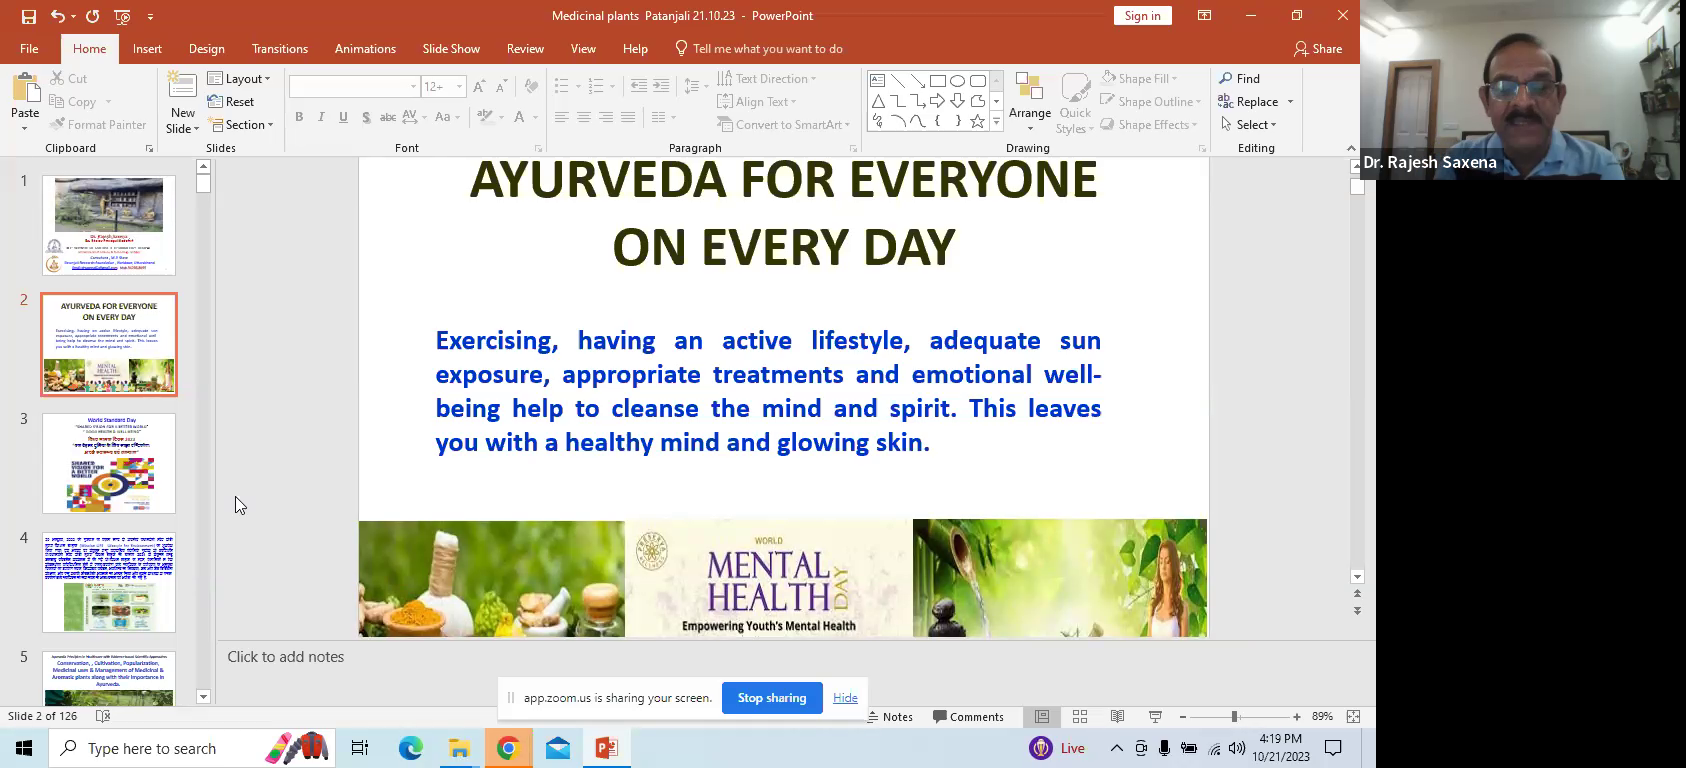 Webinar on "Ayurveda for Everyone on Everyday" organised by Patanjali Research Foundation, Haridwar under project on "Establishment of Medicinal Plant Nursery" sponsored by NMPB, Ministry of AYUSH.